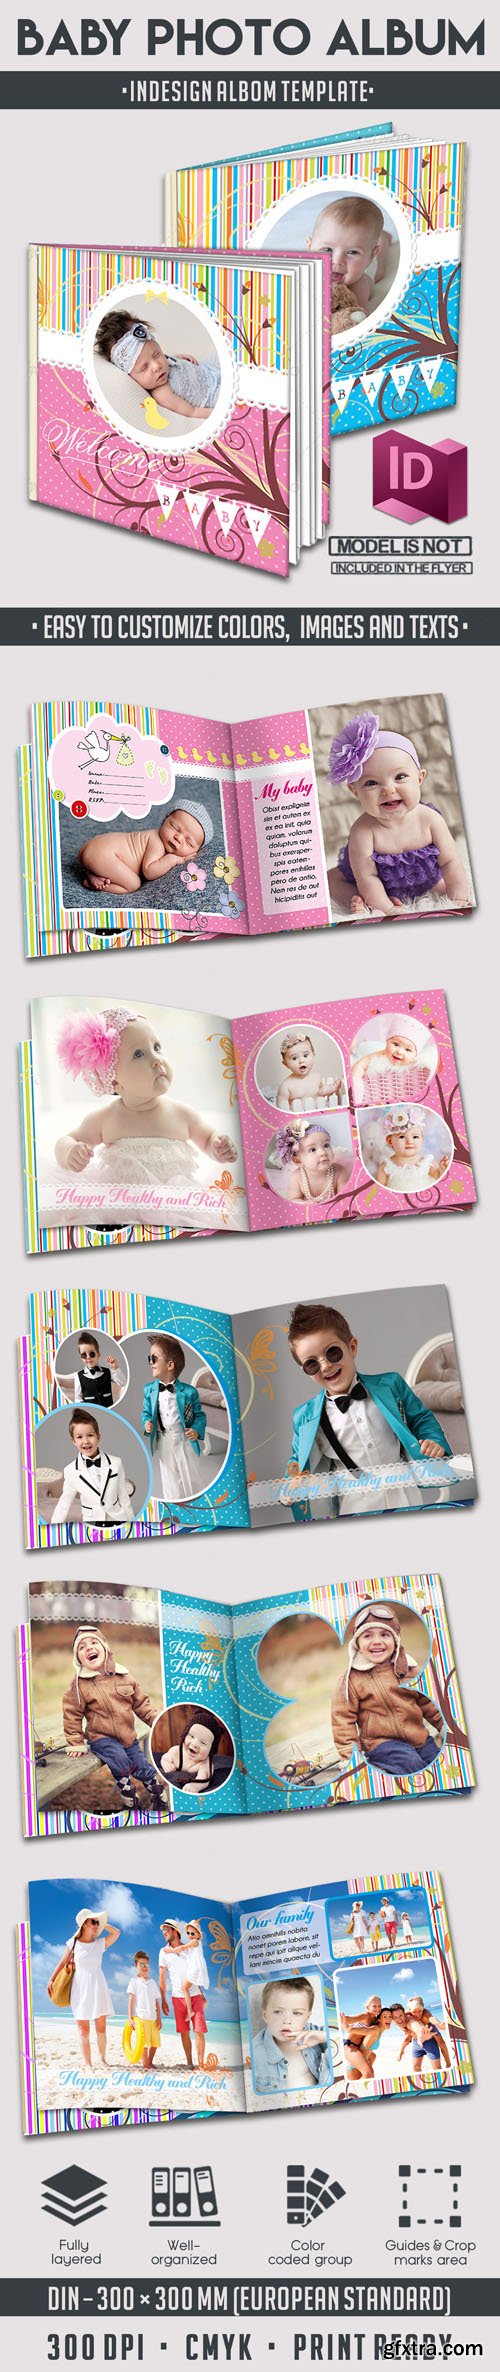 Baby Photo Album INDD - 12 pages